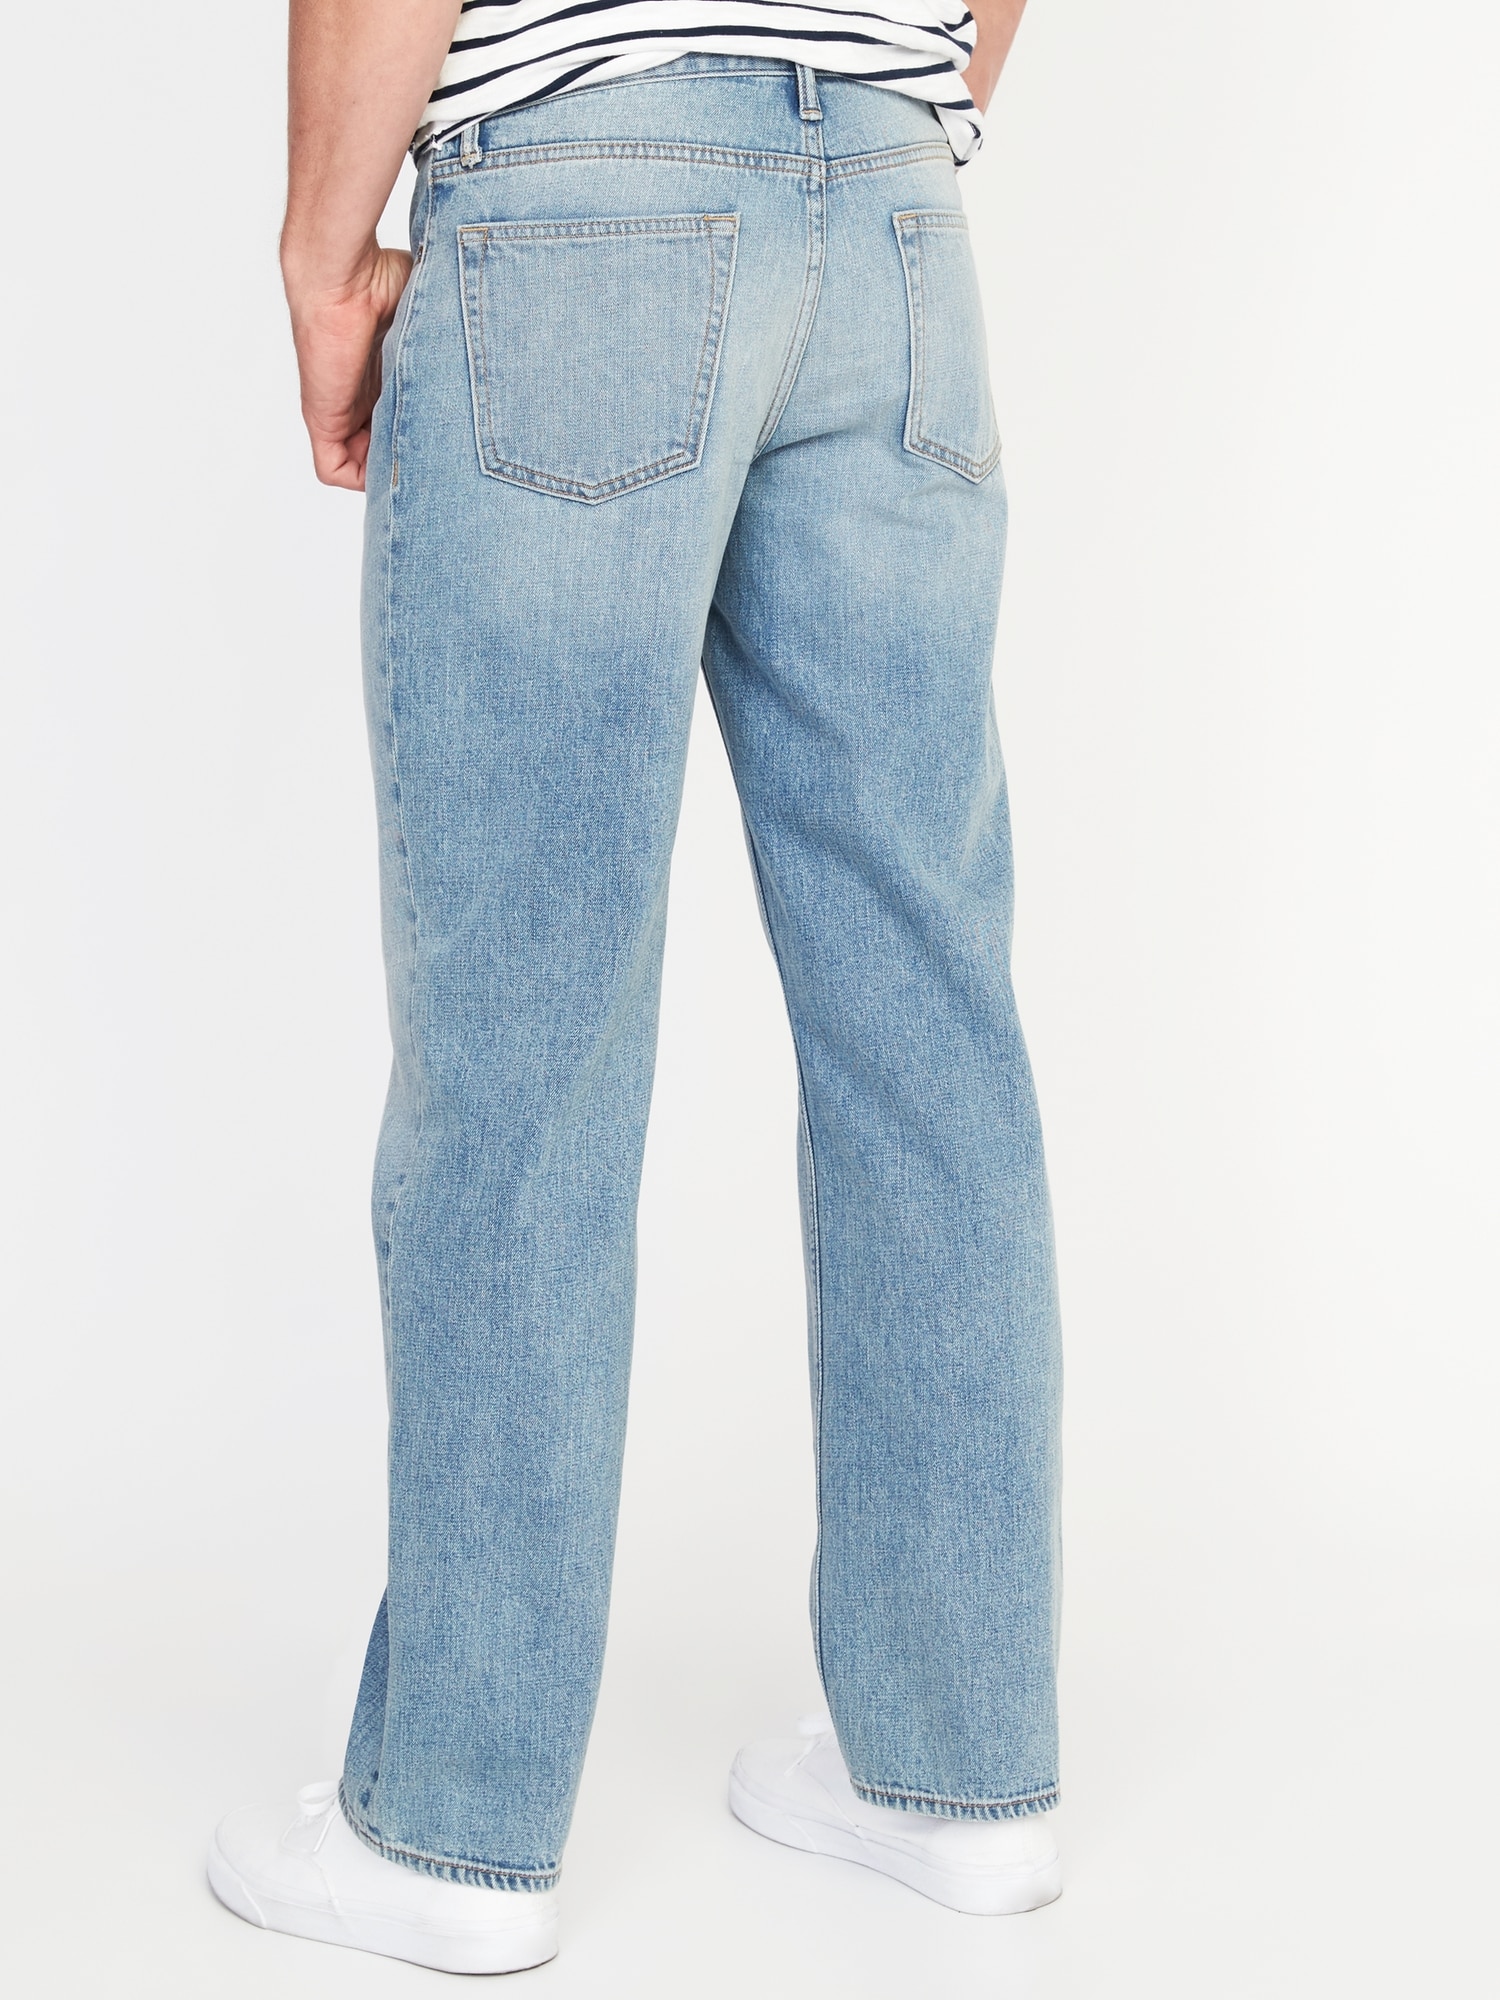 old navy men's relaxed fit jeans